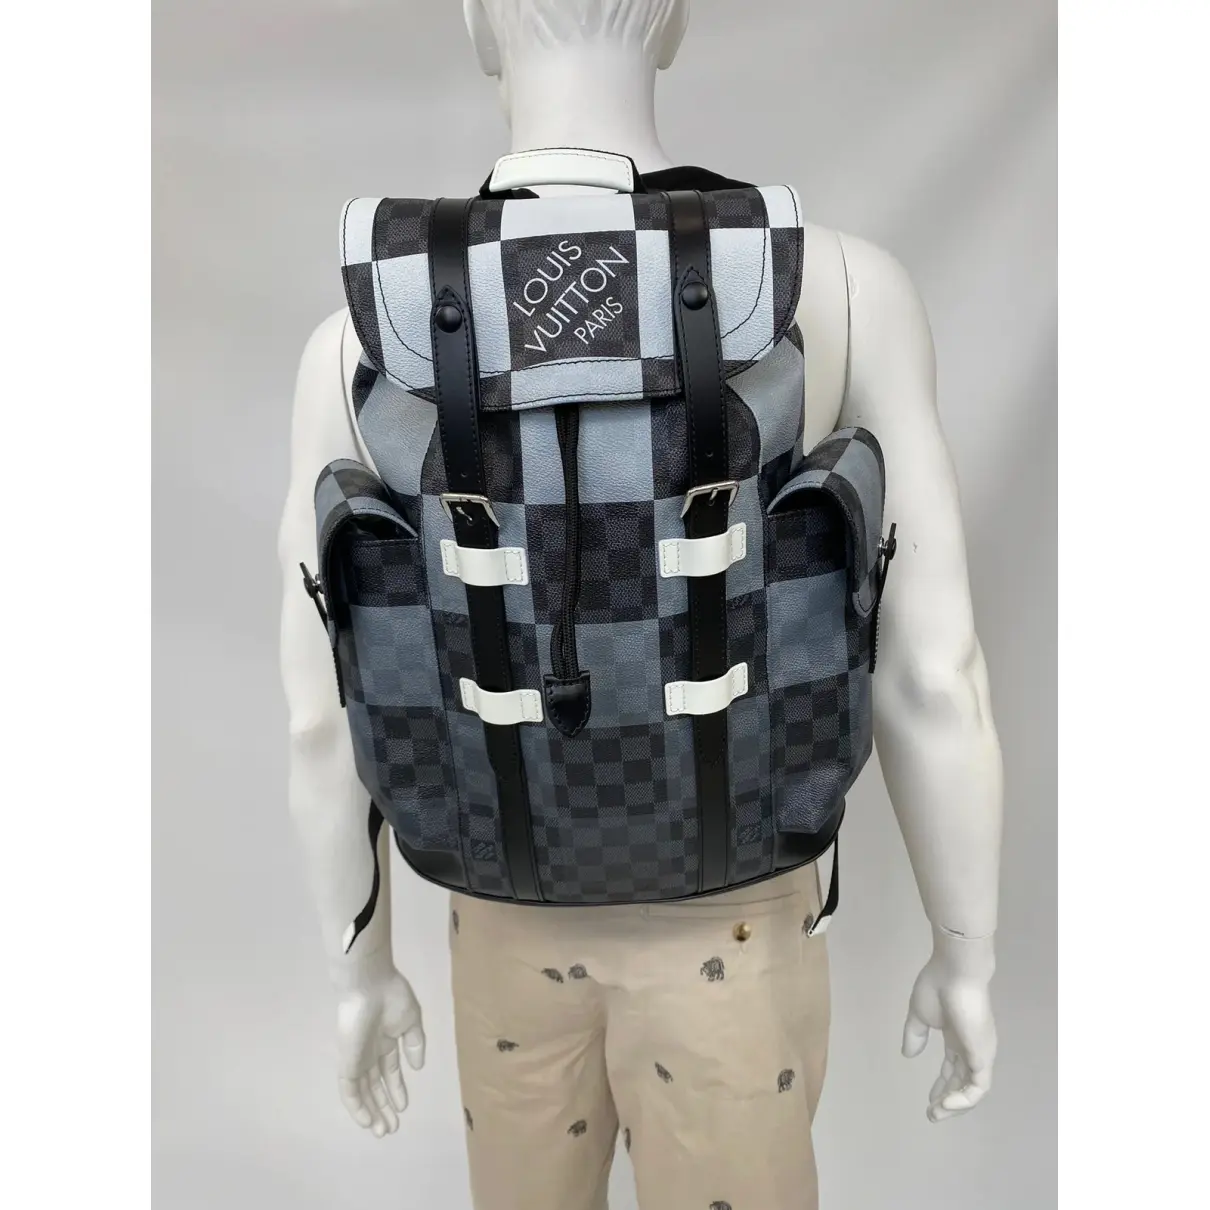 Buy Louis Vuitton Christopher Backpack leather bag online